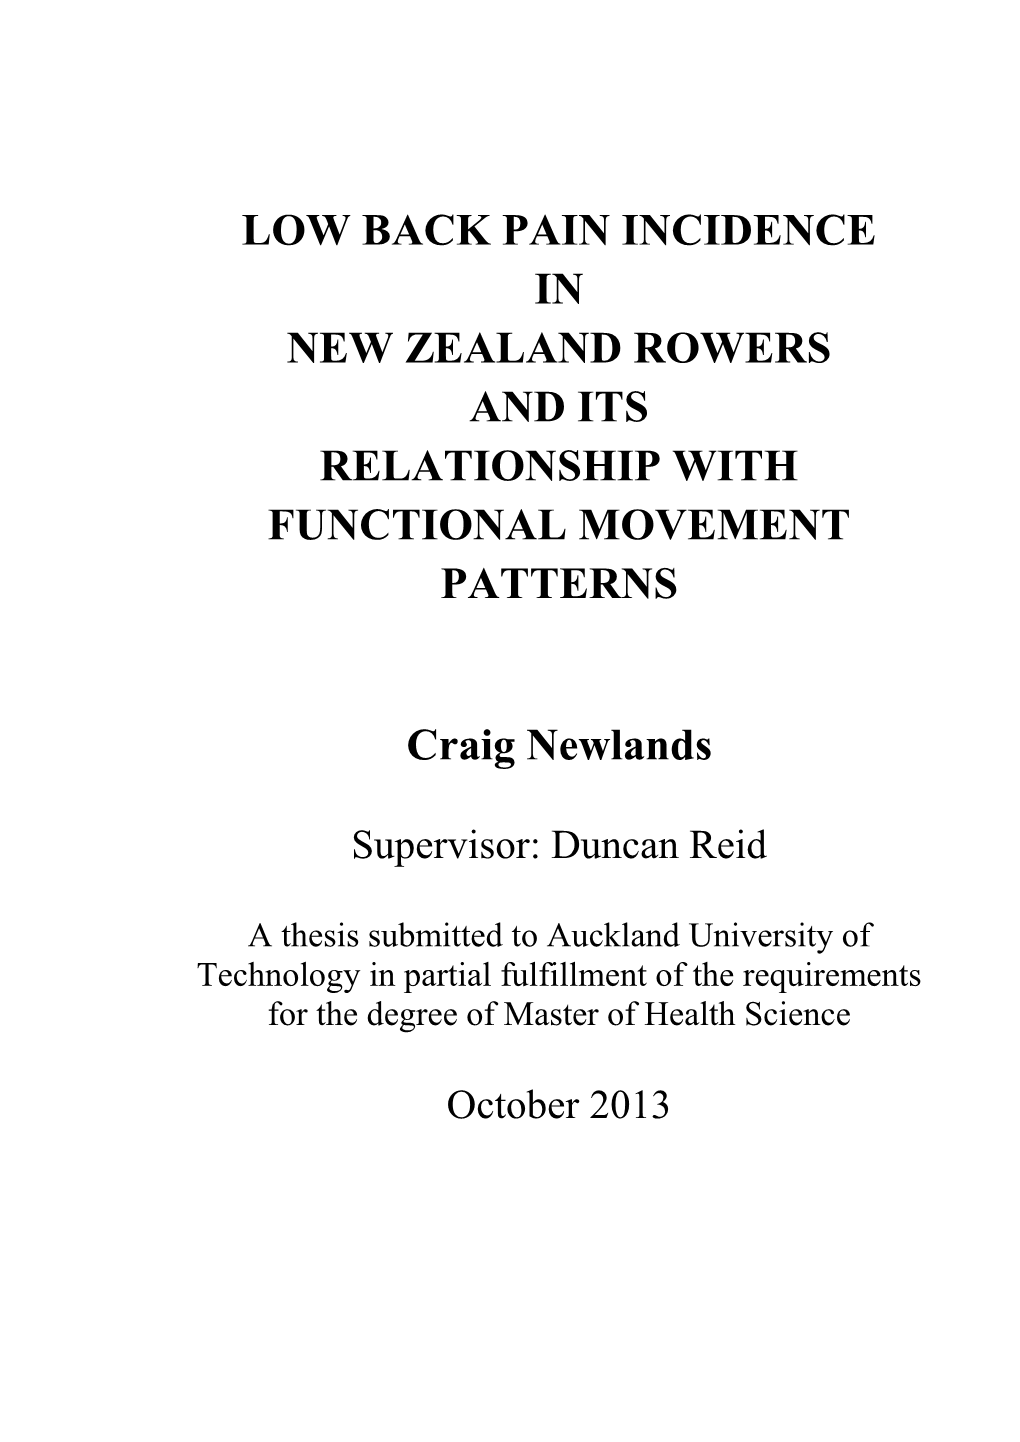 Low Back Pain Incidence in New Zealand Rowers and Its Relationship with Functional Movement Patterns